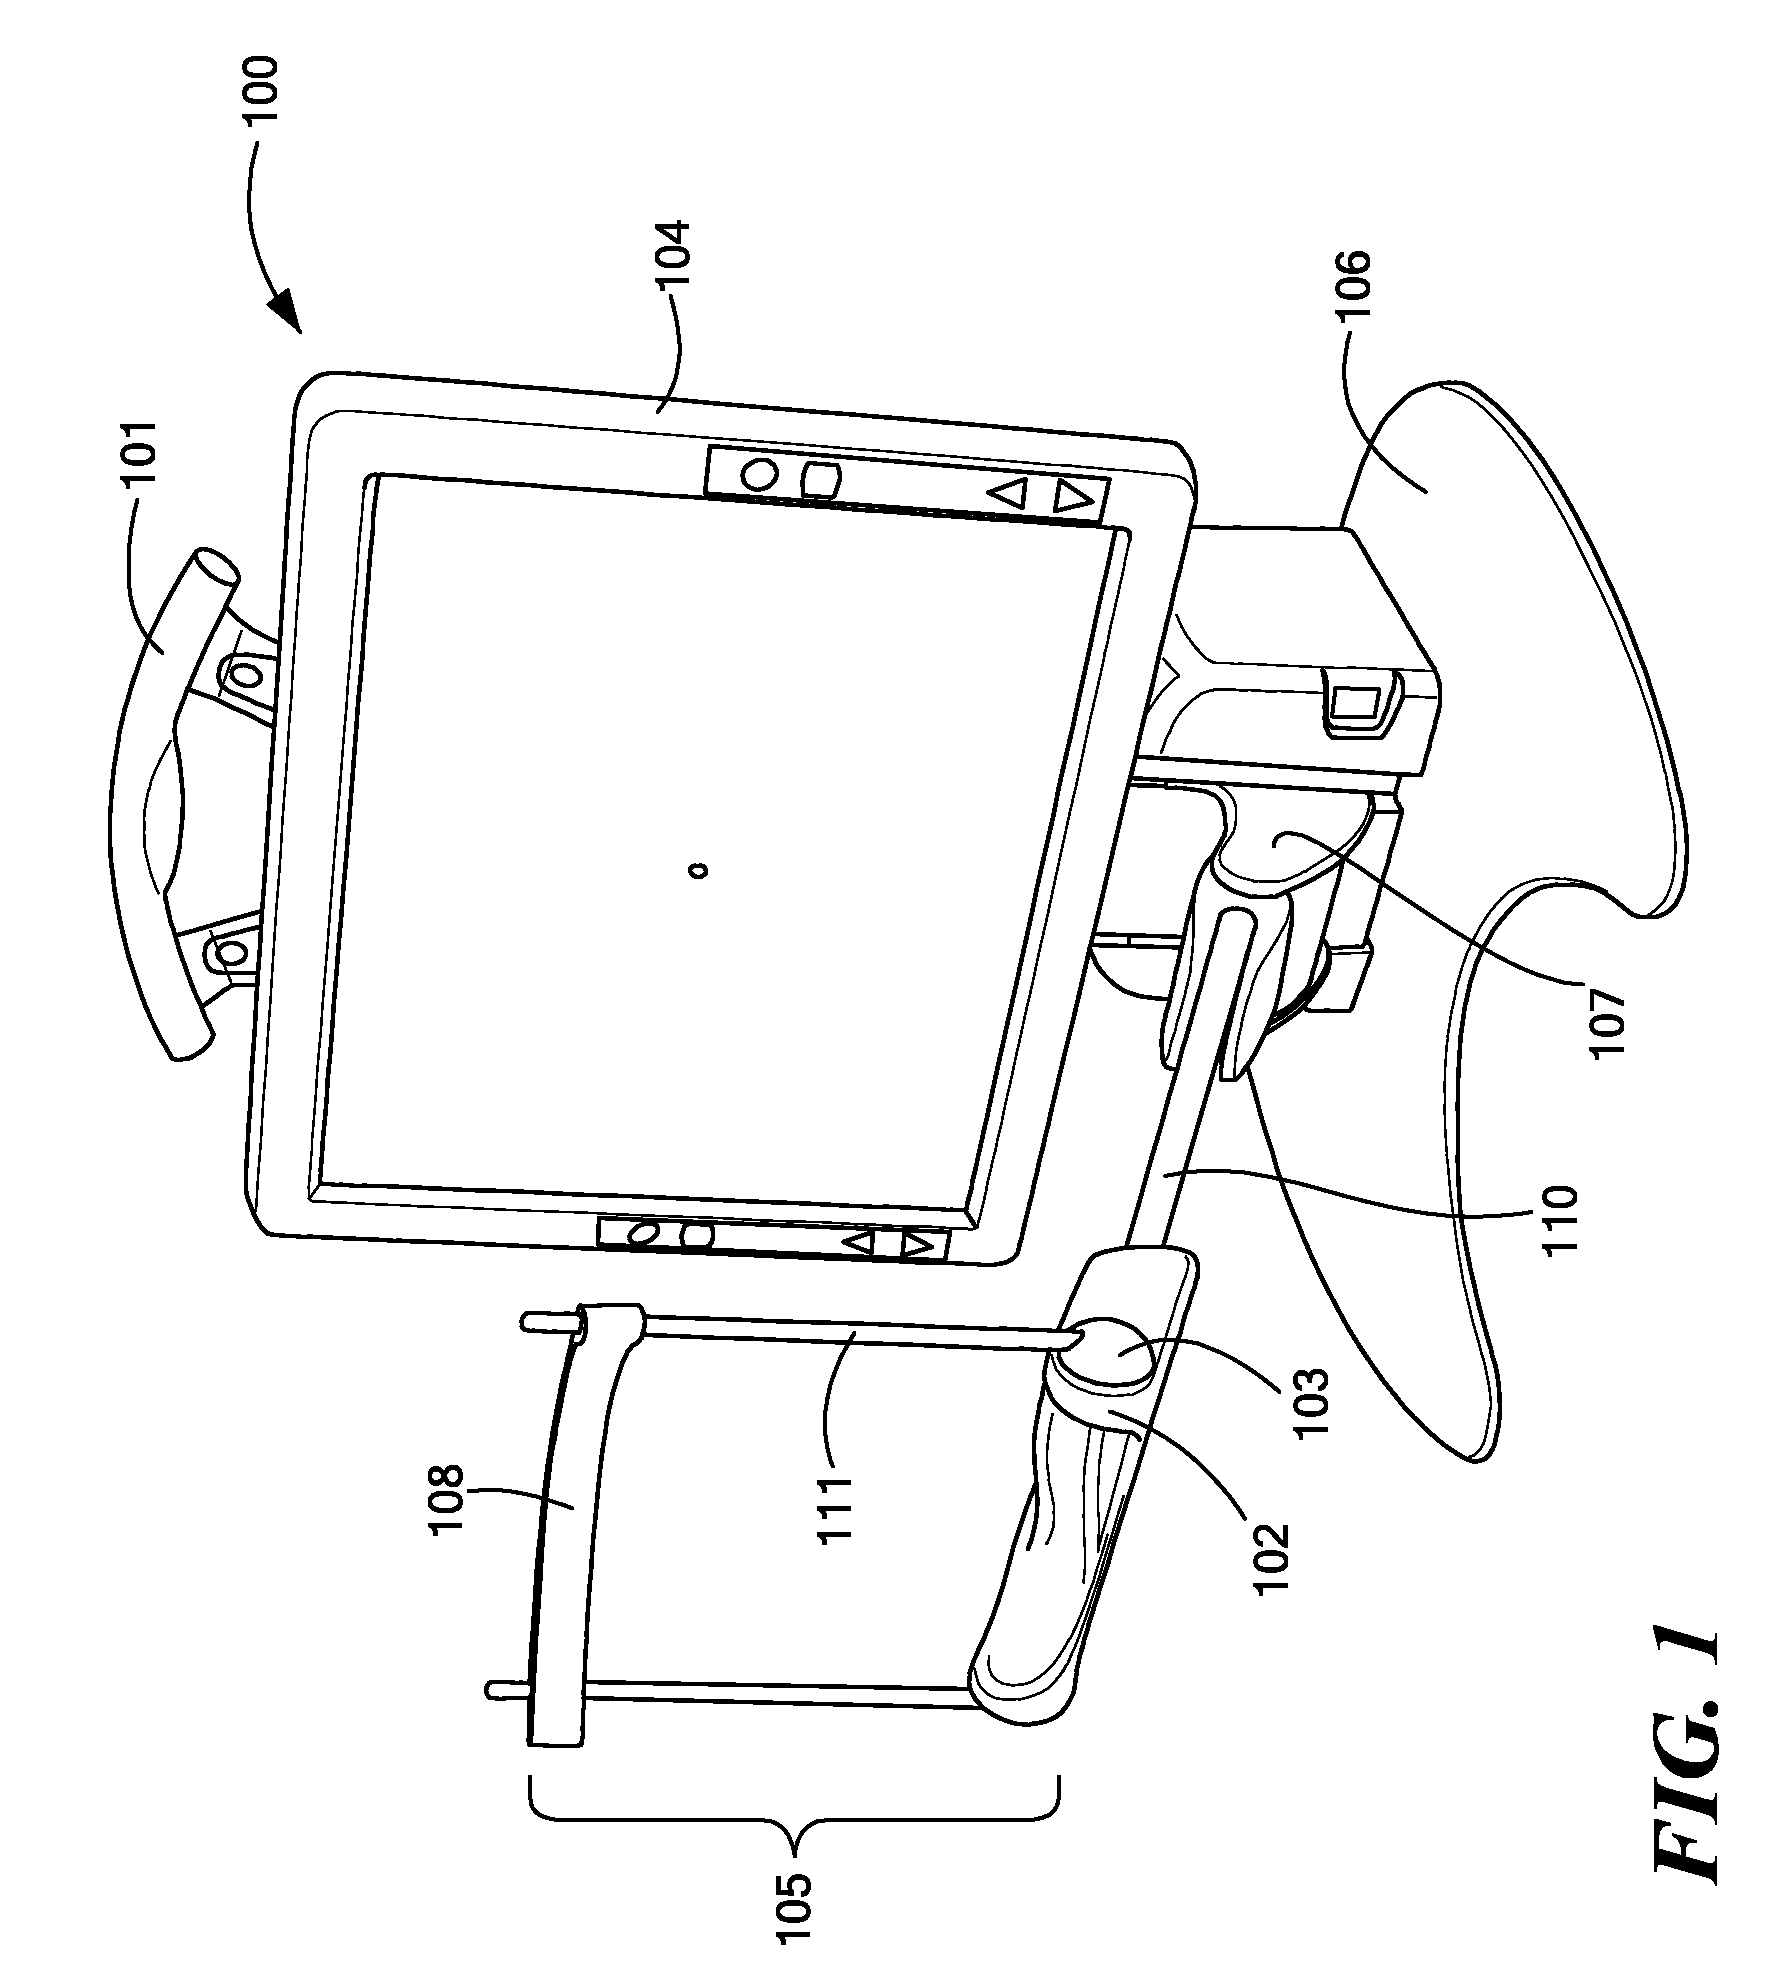 Adjustable device for vision testing and therapy